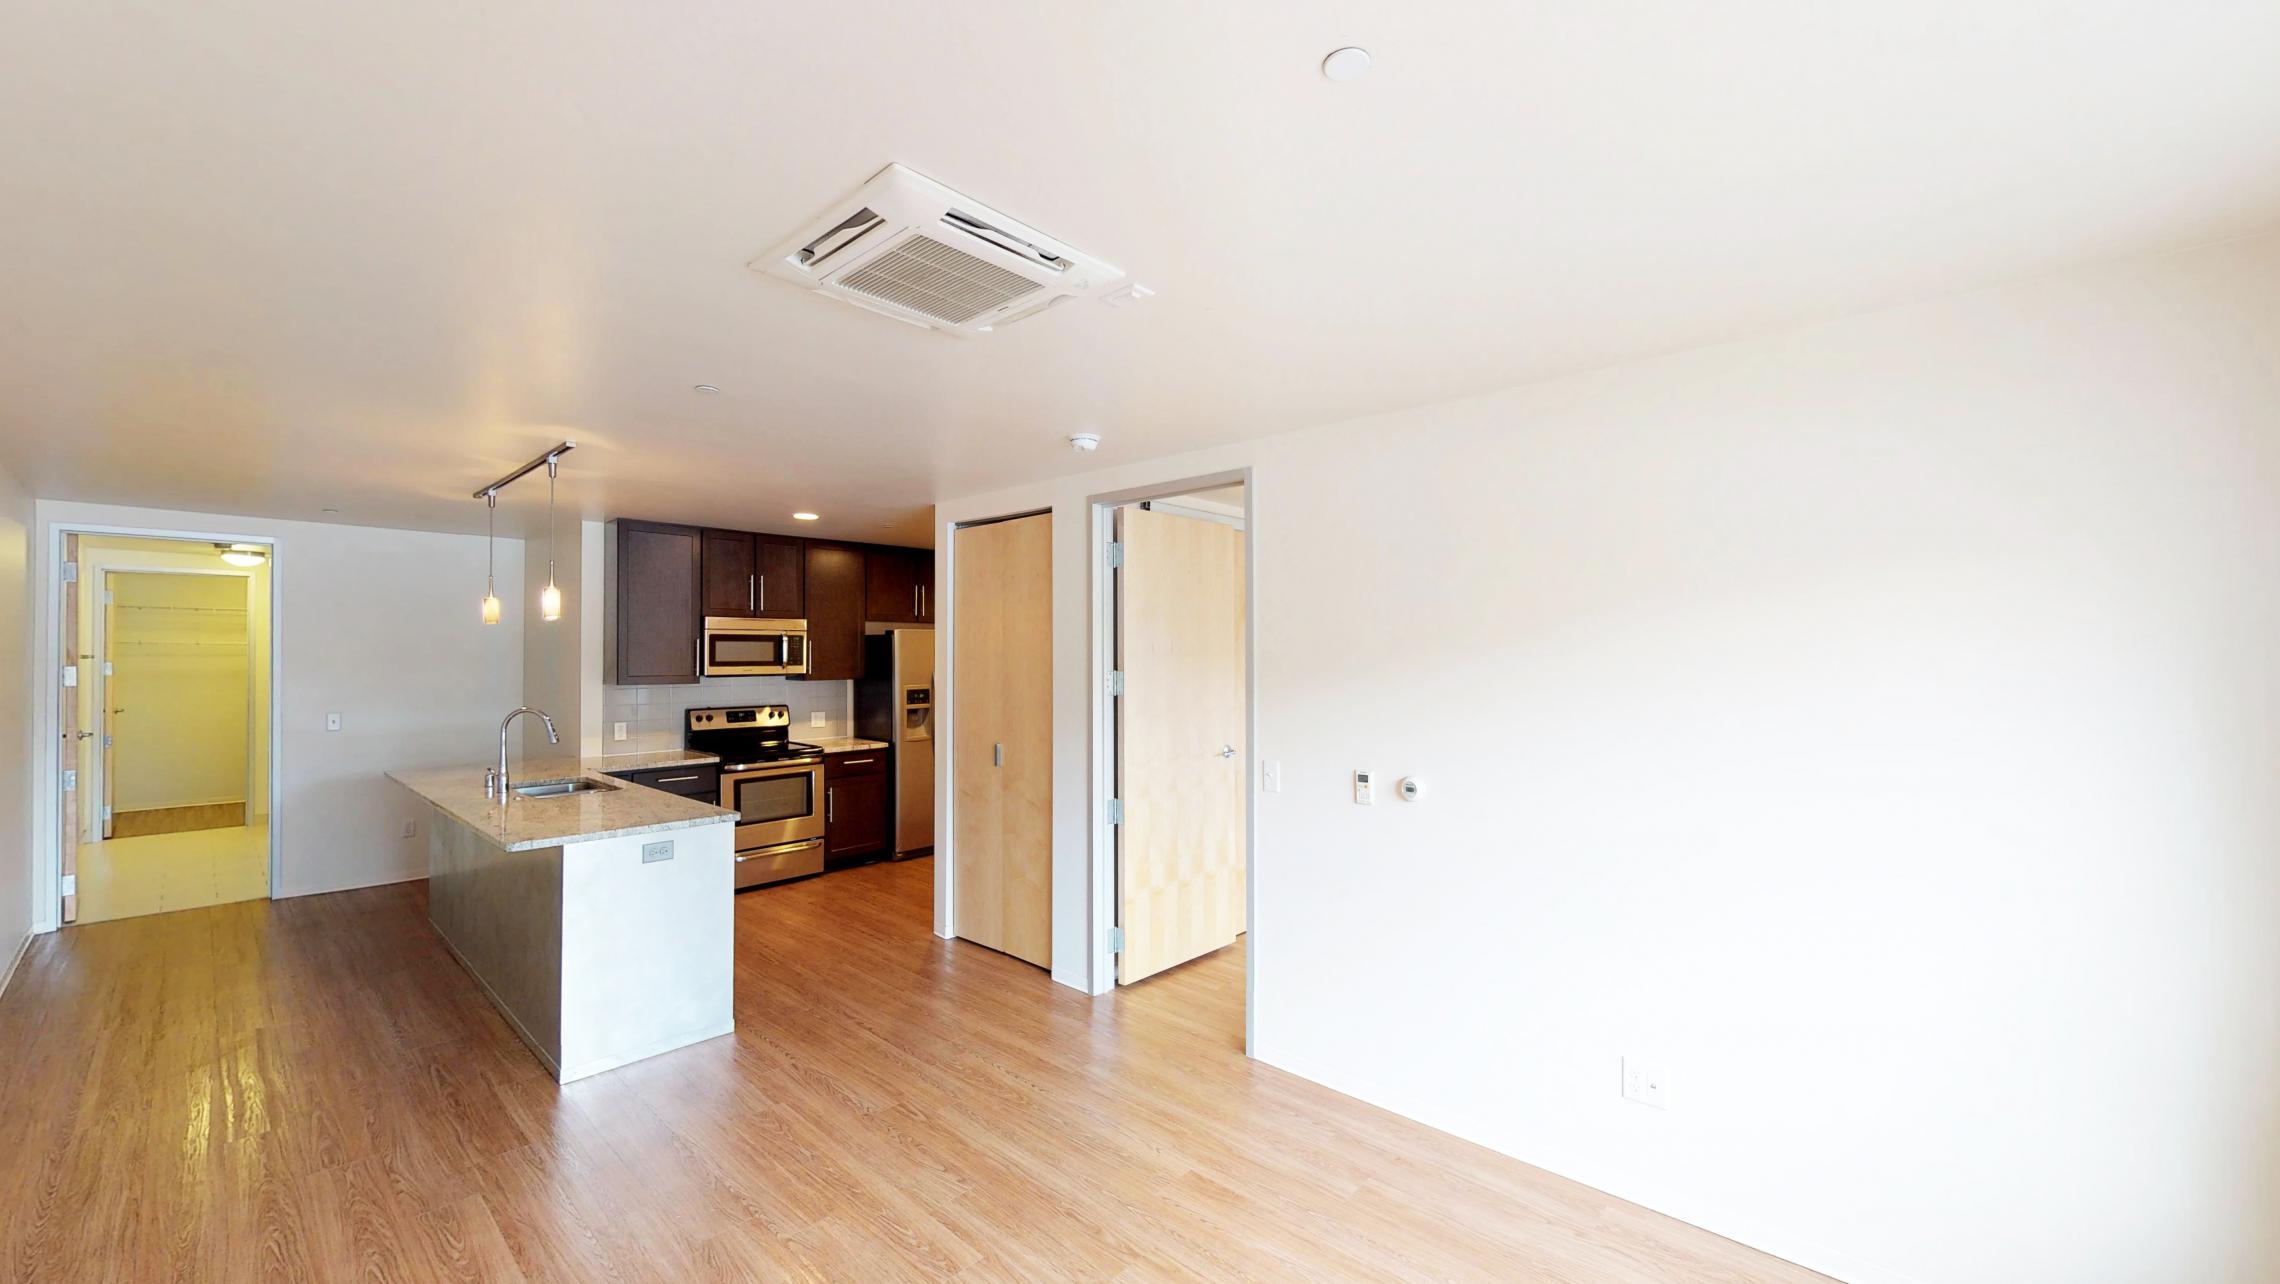 Capitol-Hill-Apartment-306-Living room- kitchen -one bedroom-capitol view-downtown-luxury-modern.jpg